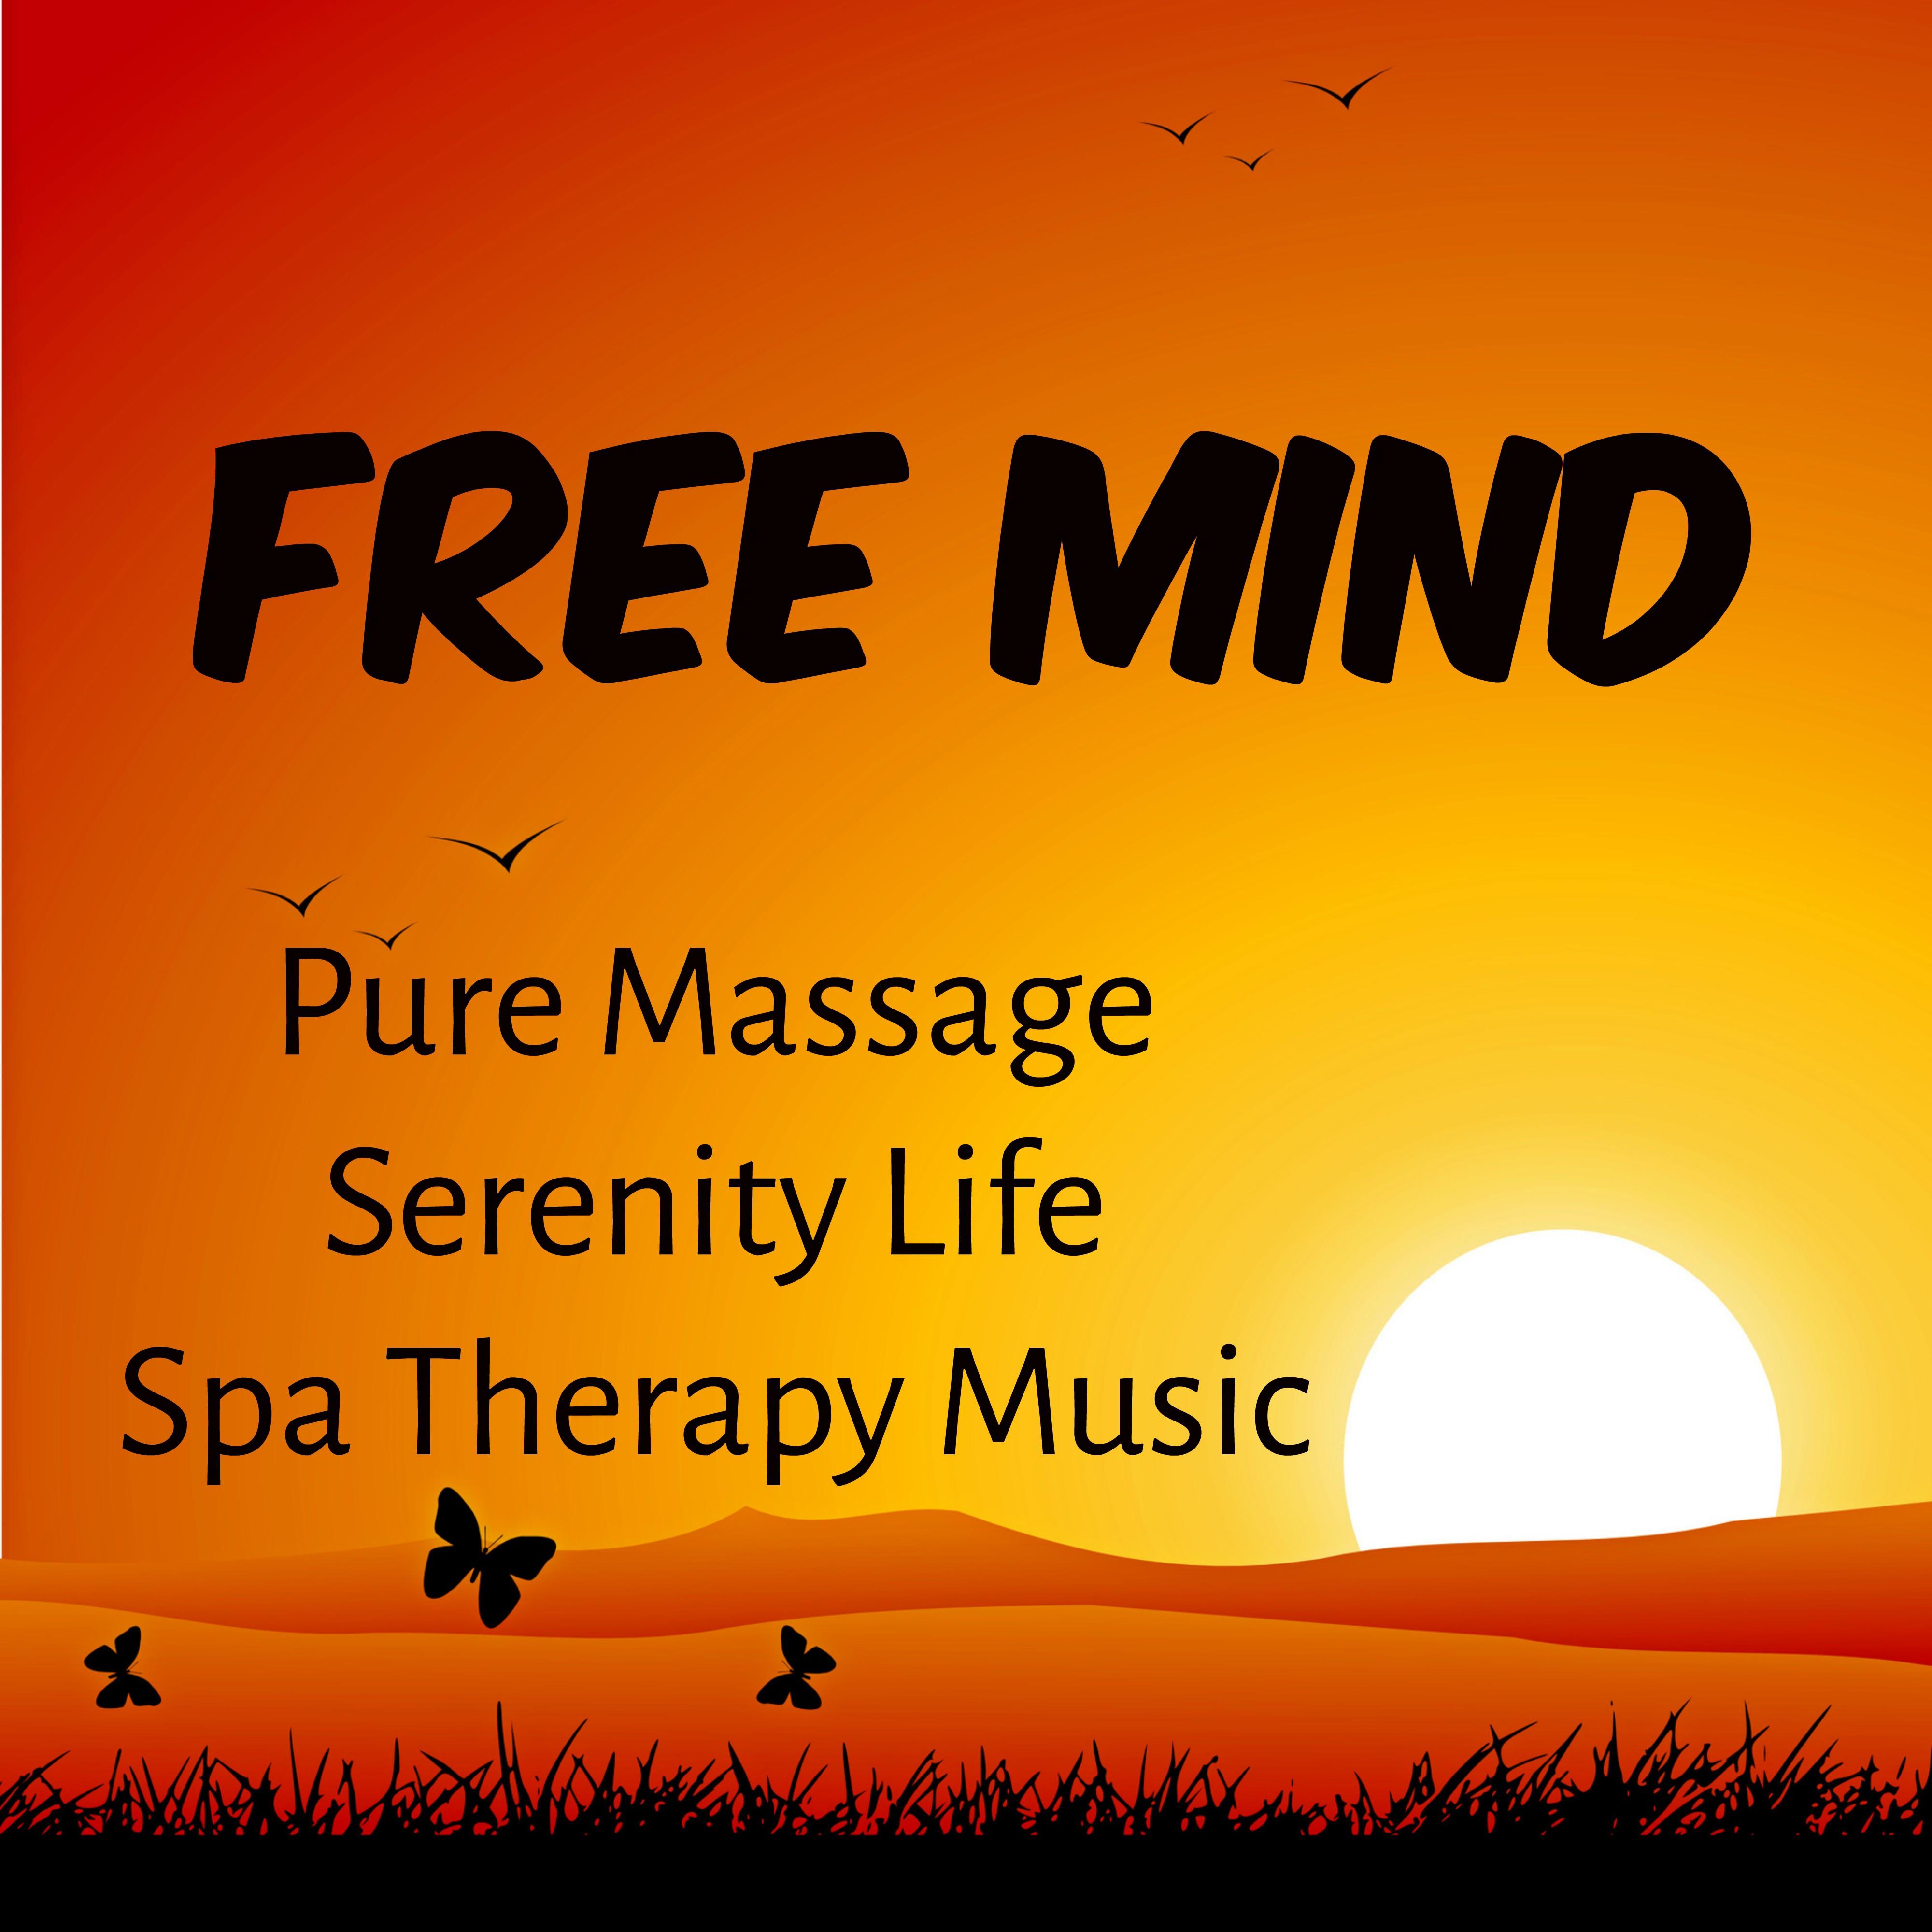 Free Mind - Pure Massage Serenity Life Spa Therapy Music for Deep Relaxation Meditative Time Regeneration